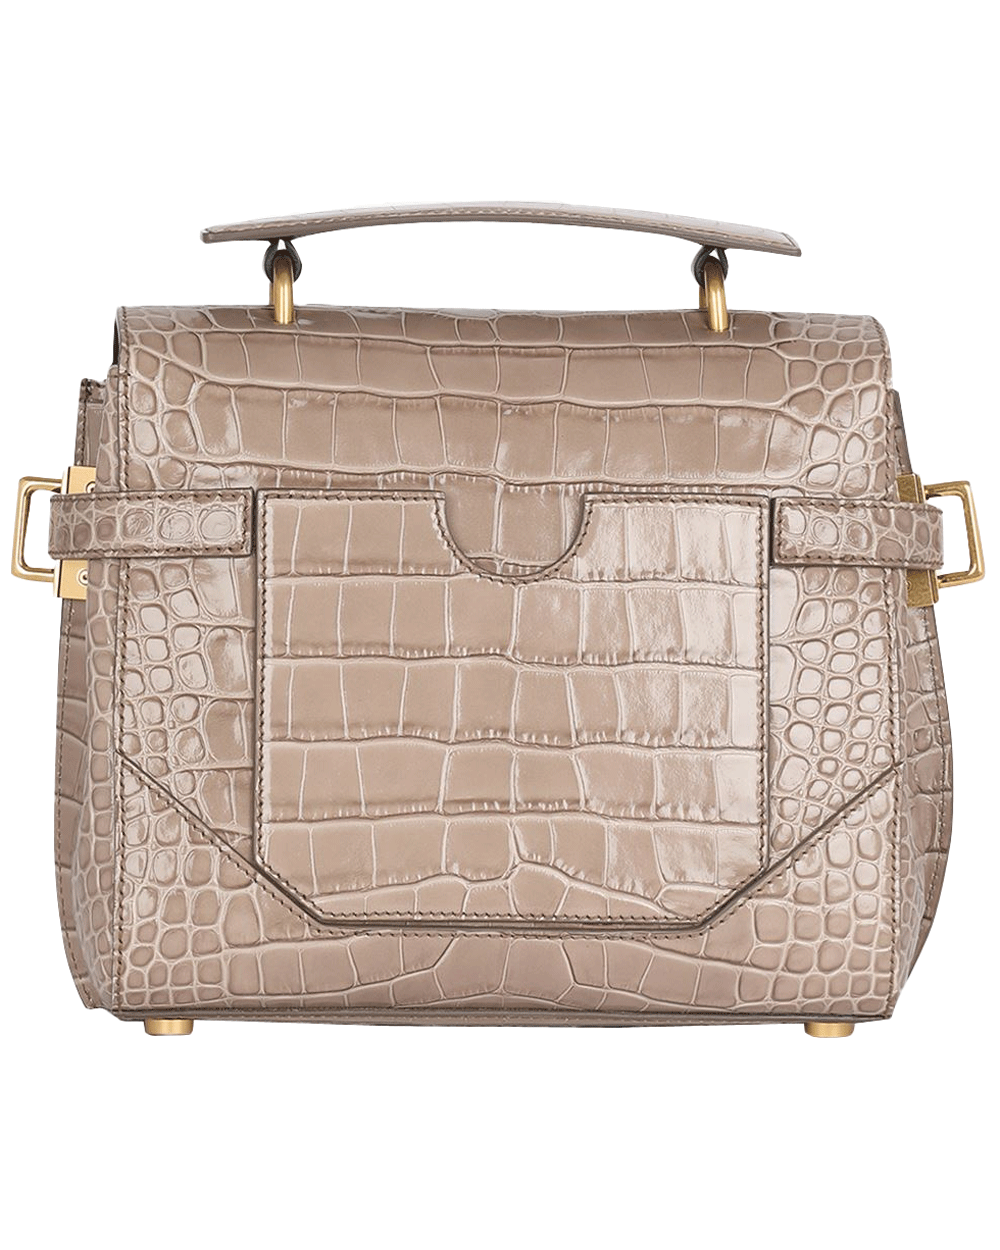 Crocodile Embossed B Buzz 23 Bag in Taupe